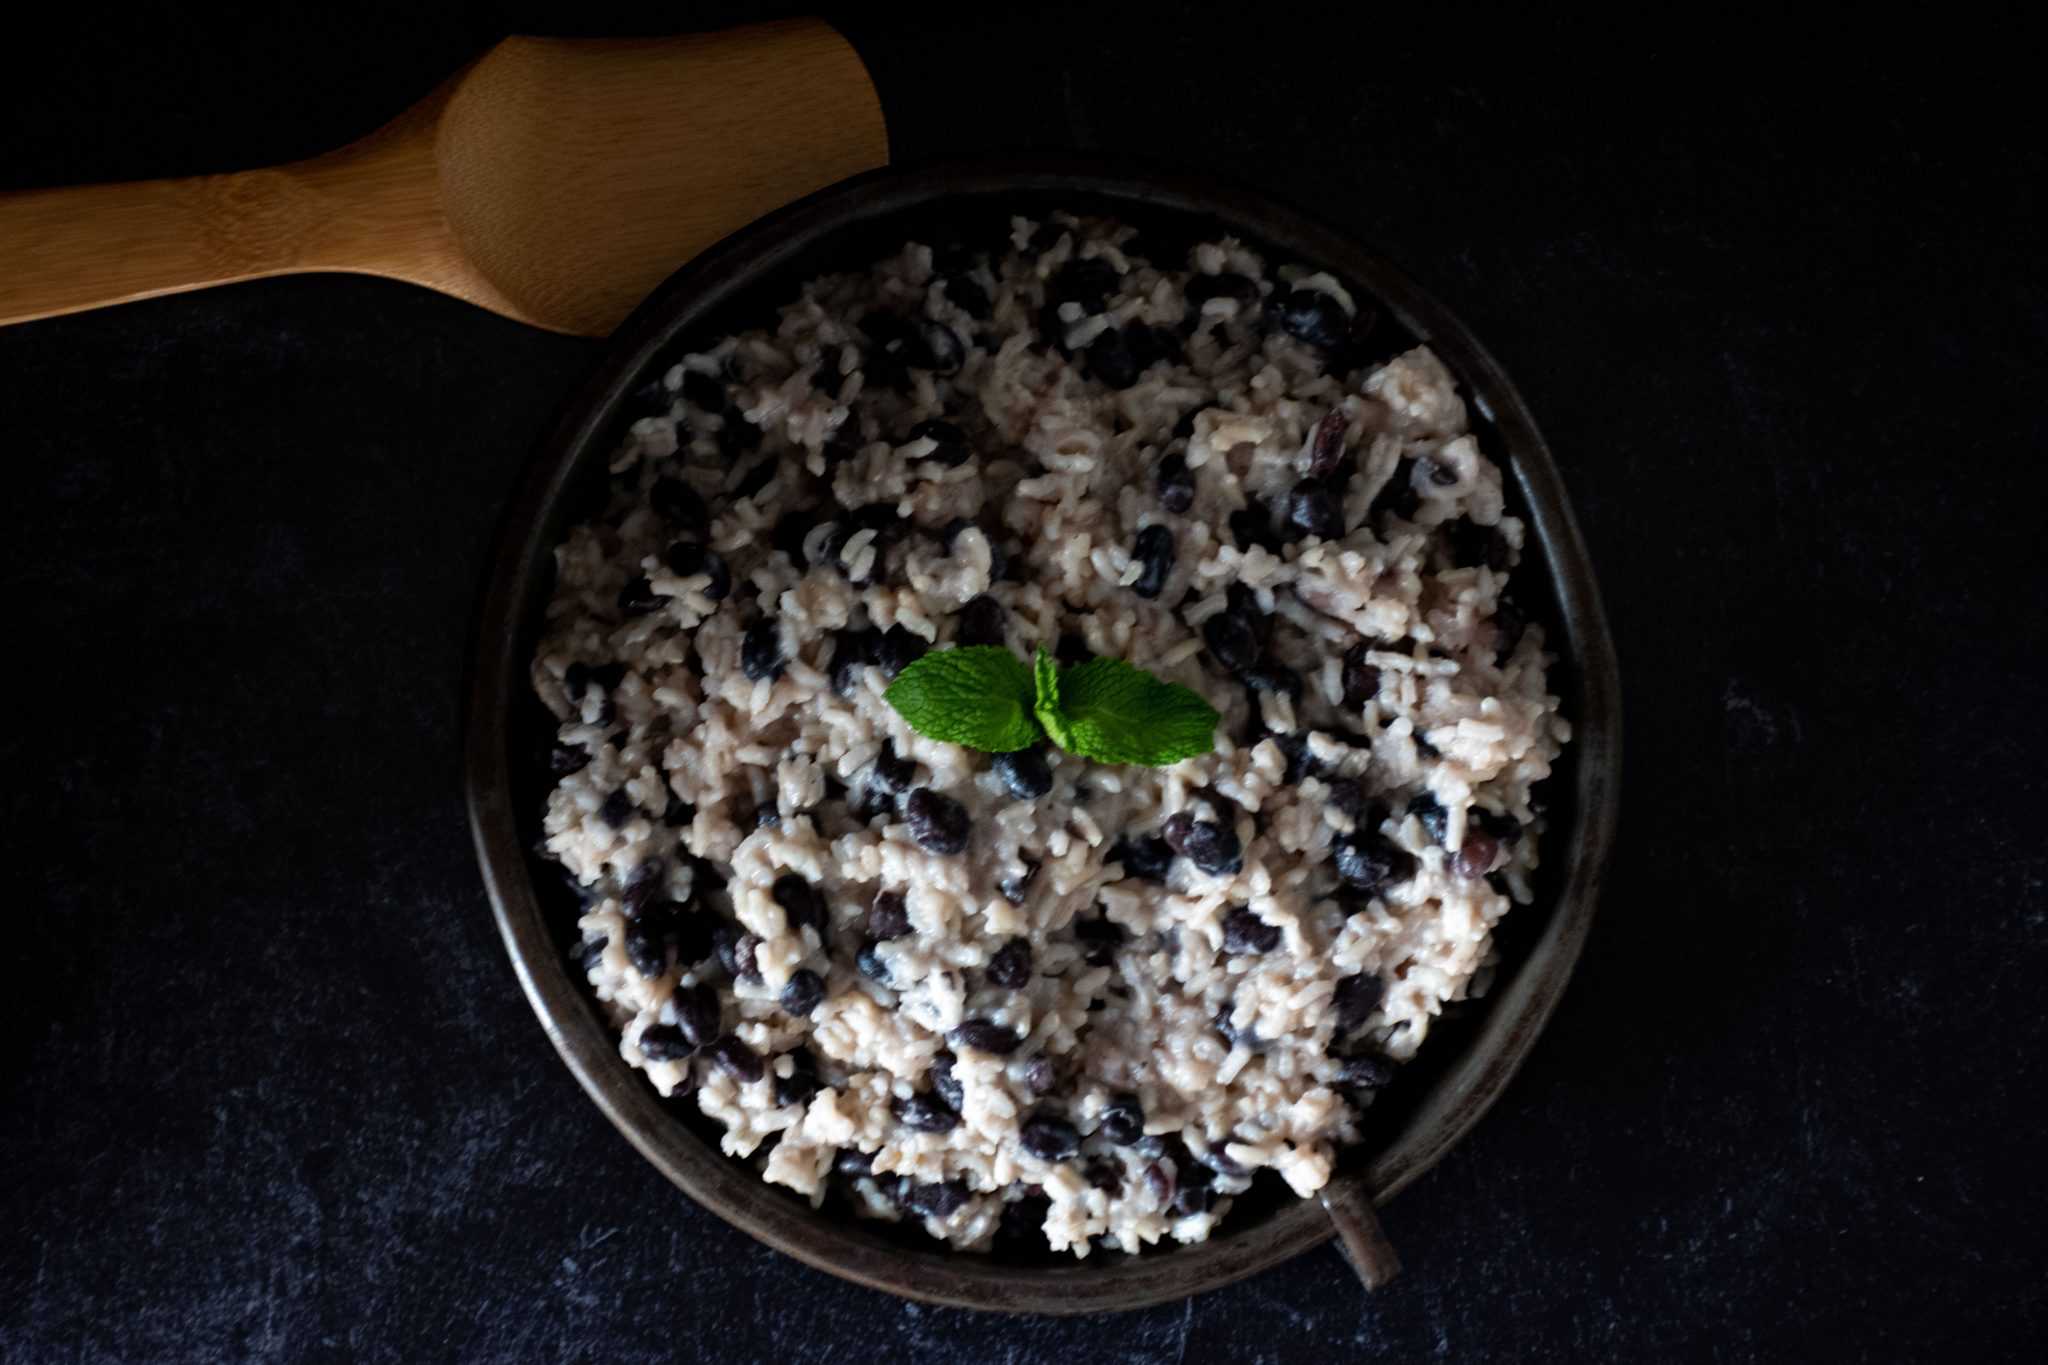 Banana coconut rice and black beans on a round metal plate, garnished with mint, on a dark background with dramatic shadows.